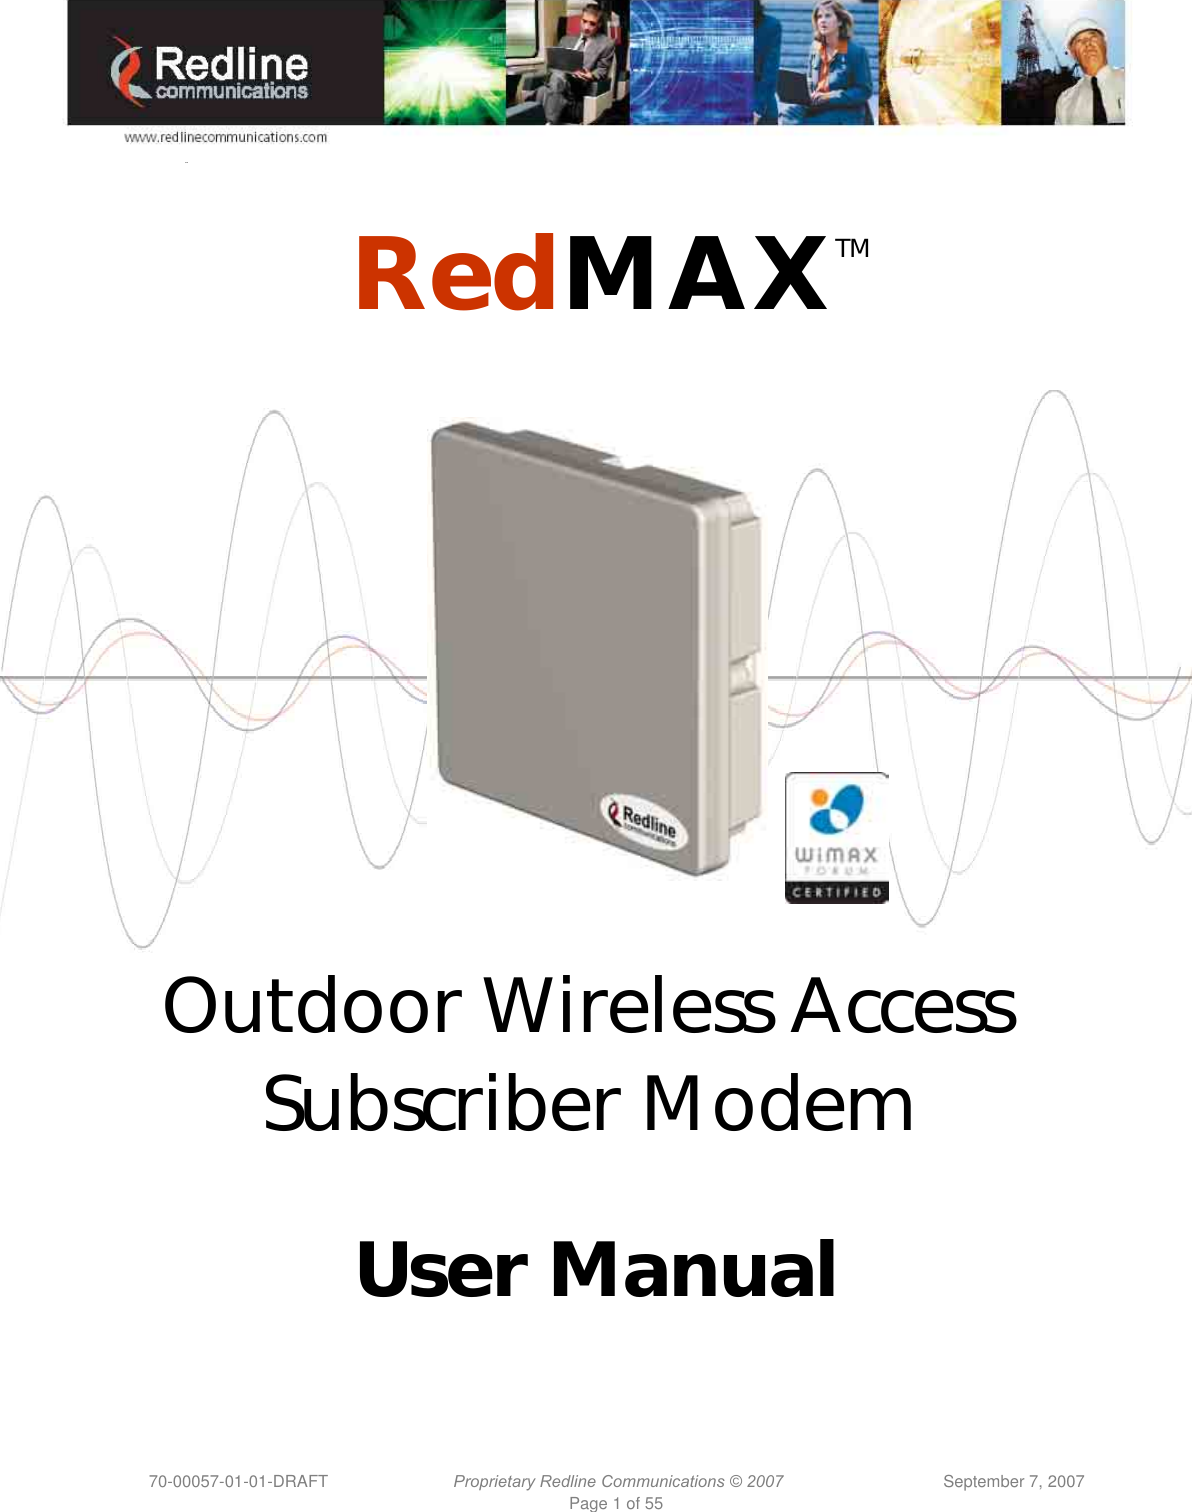      70-00057-01-01-DRAFT  Proprietary Redline Communications © 2007  September 7, 2007   Page 1 of 55 a m  RedMAXTM        Outdoor Wireless Access Subscriber Modem   User Manual 